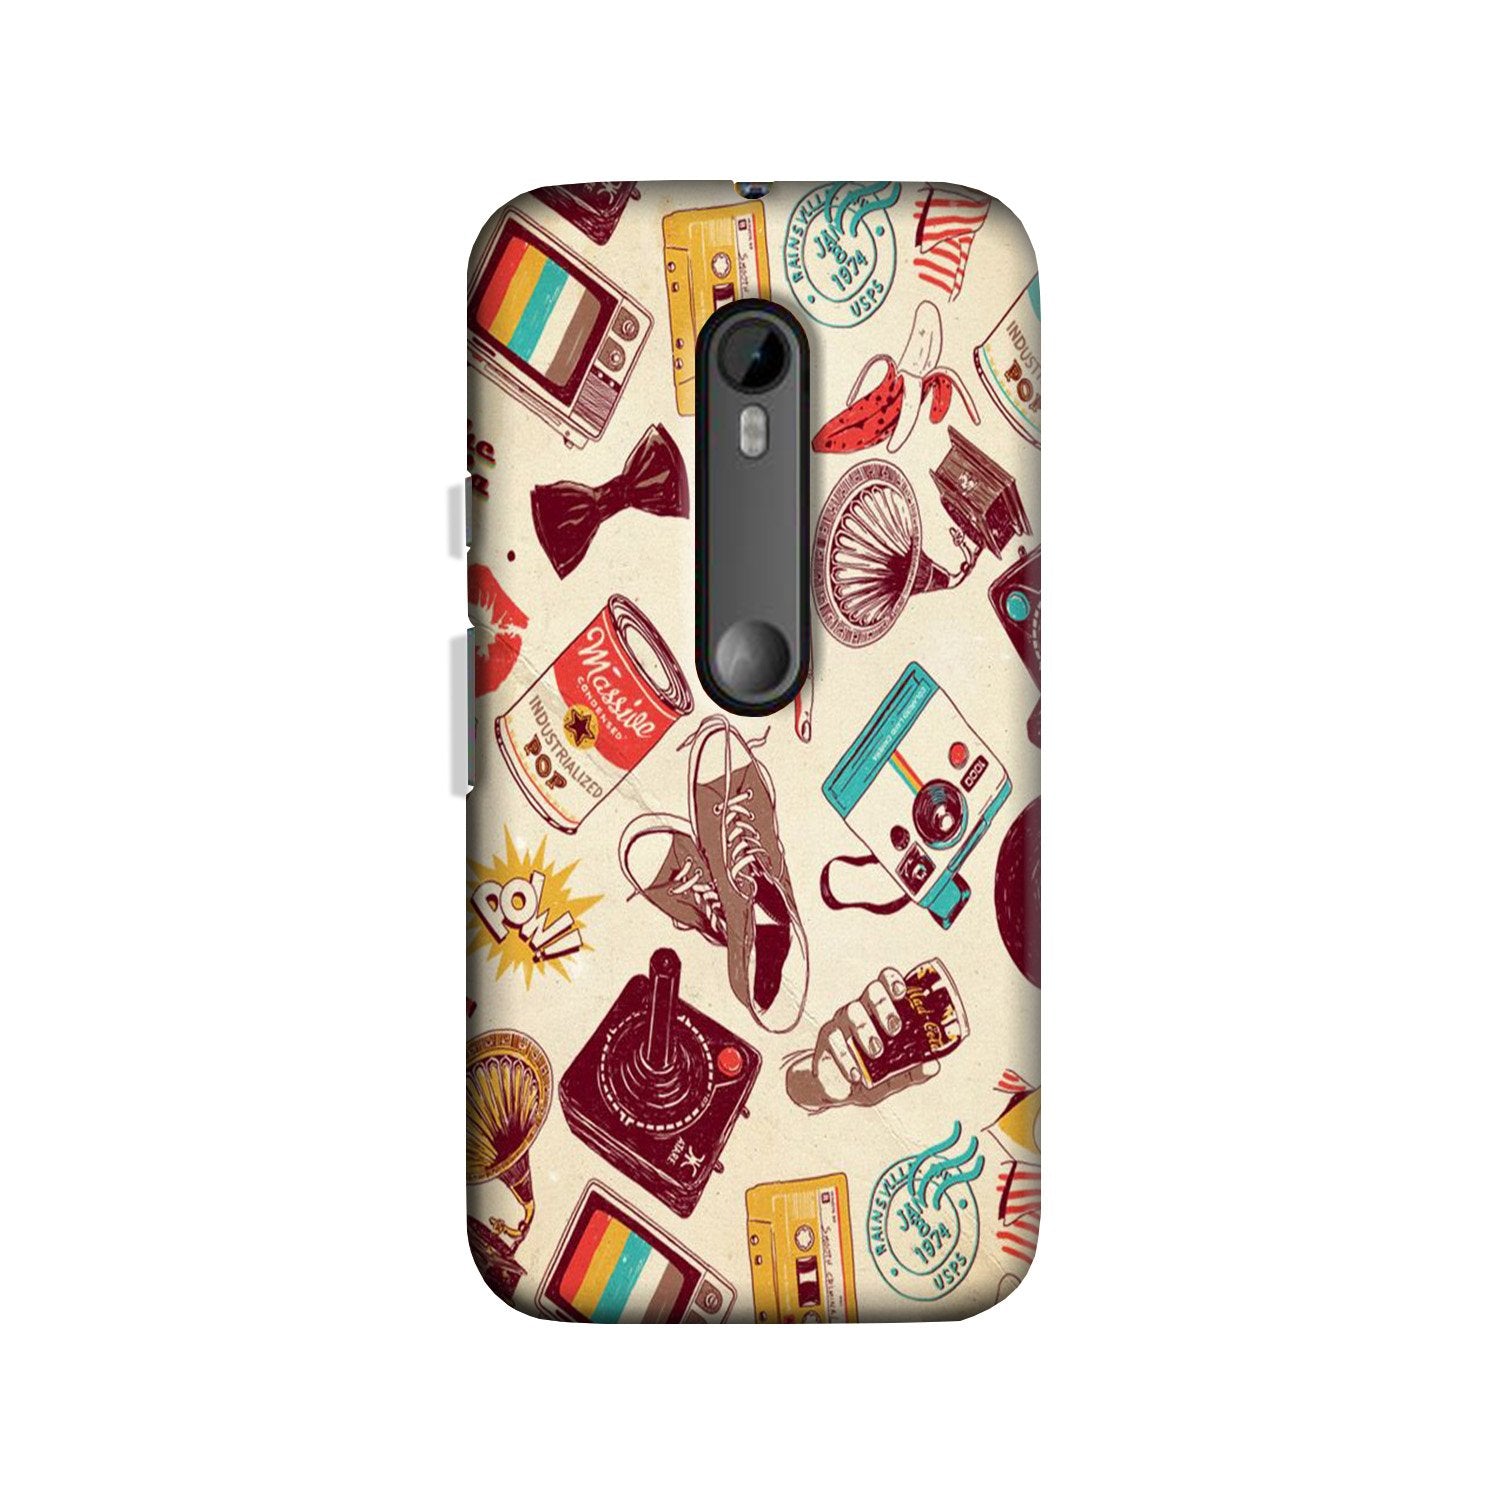 Vintage Case for Moto X Style